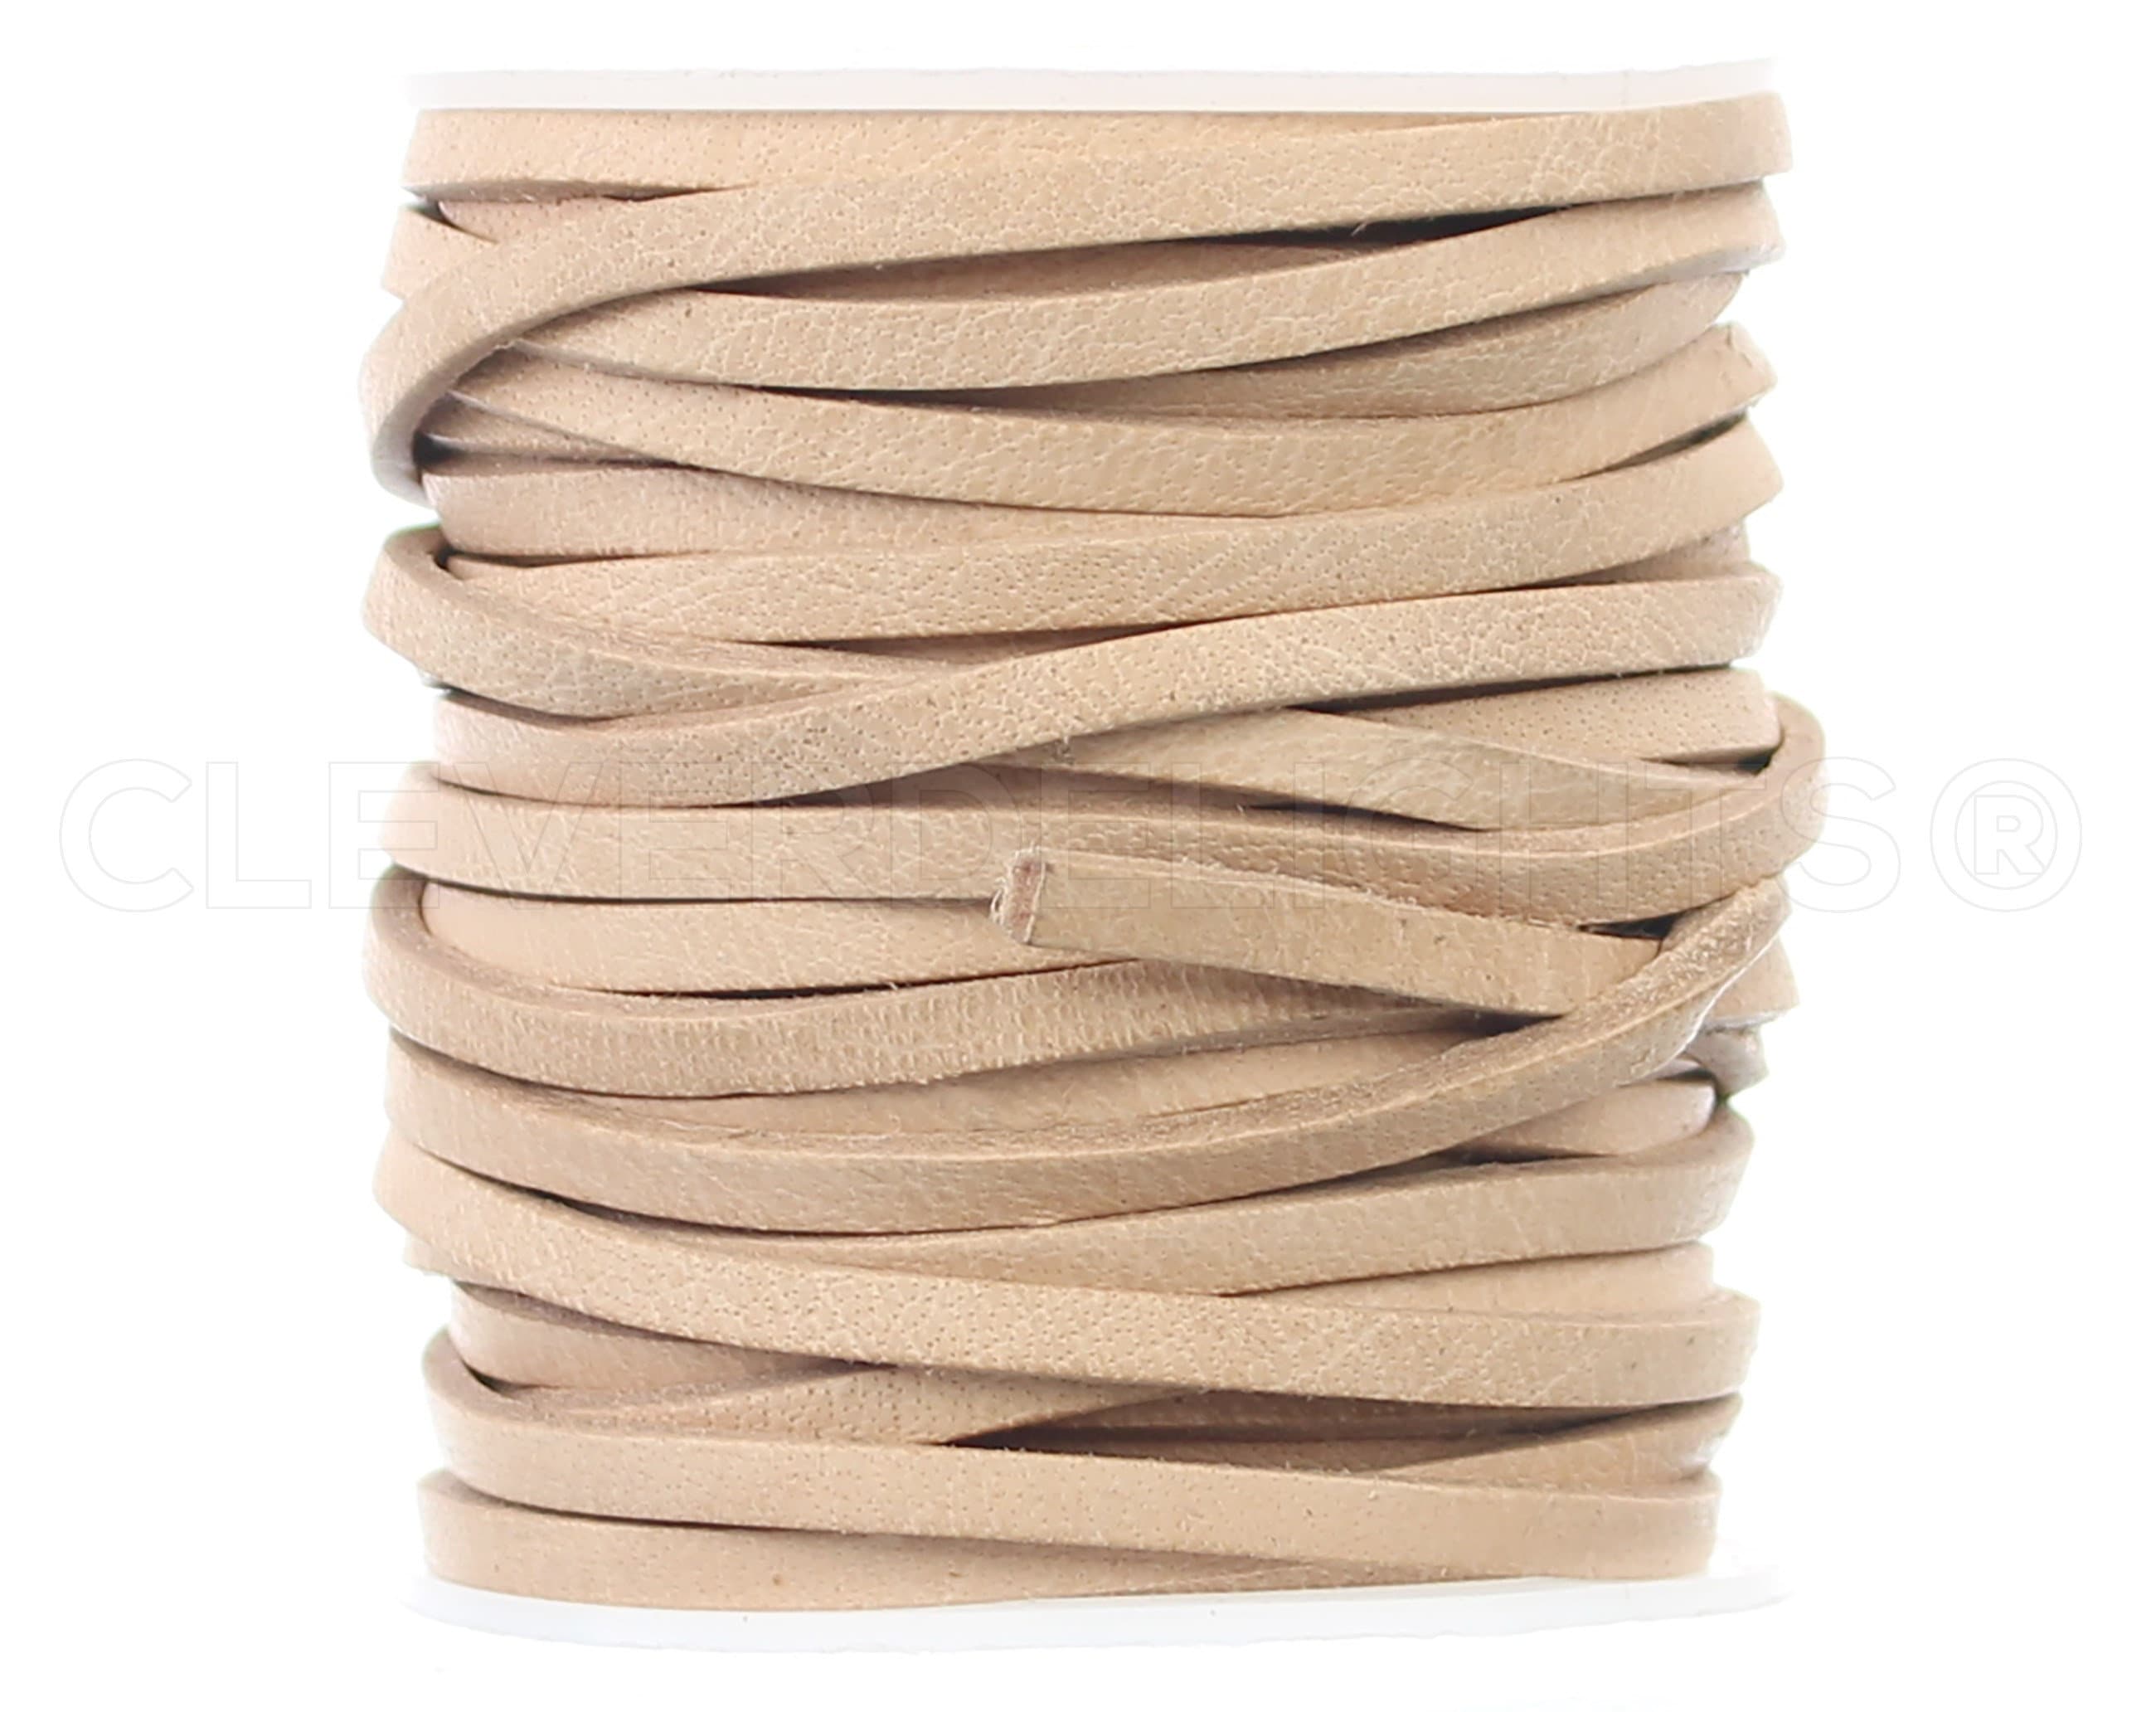 Cleverdelights Premium Jute Twine String White 100 yards Made in India